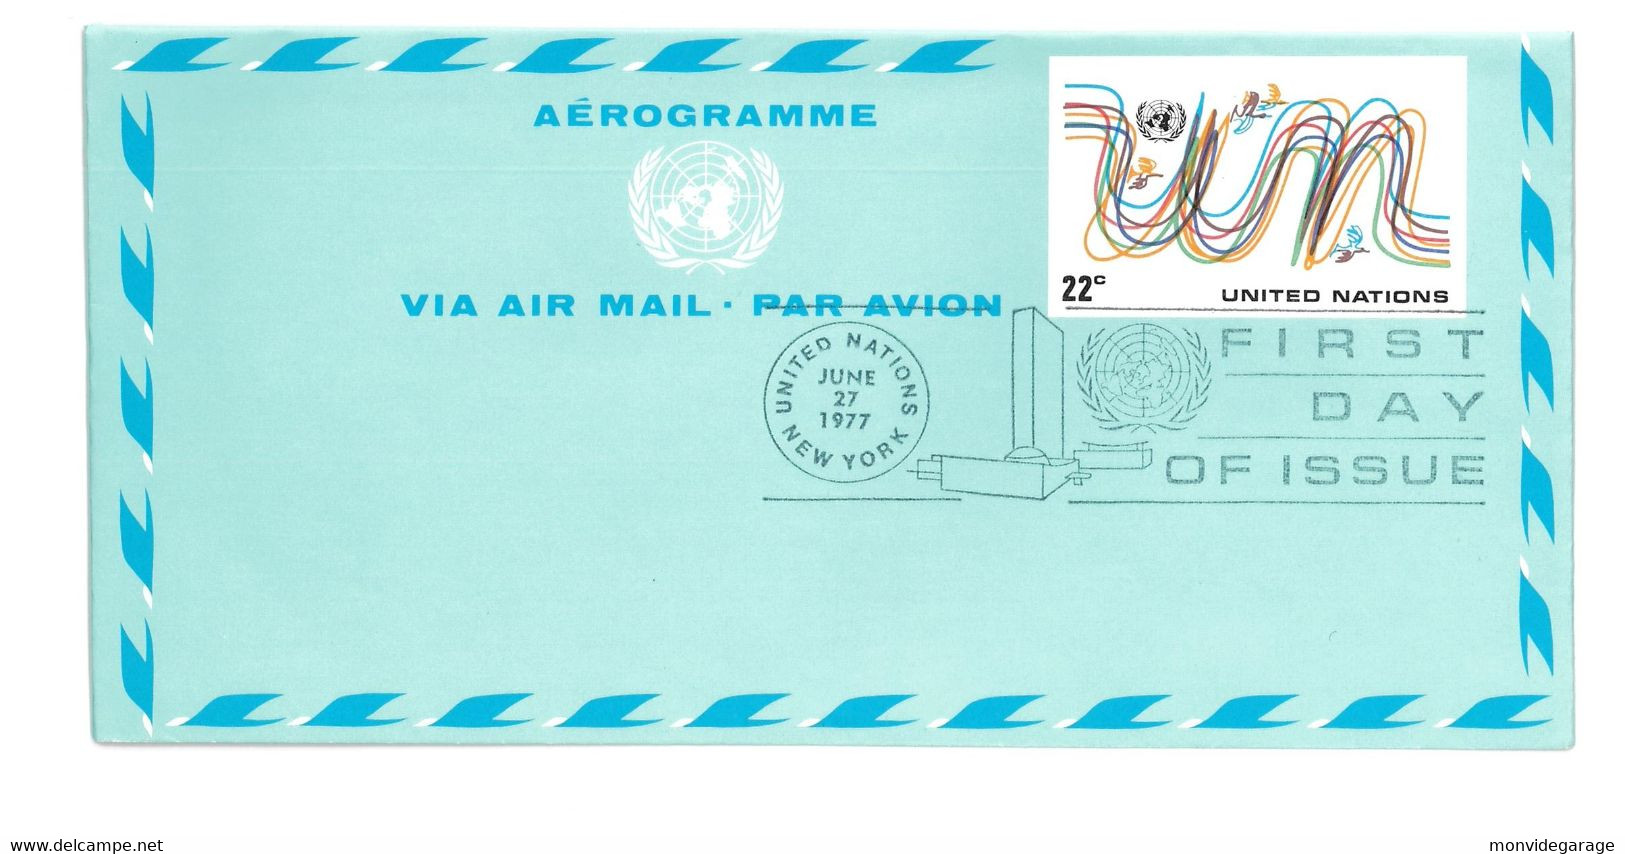 United Nations - Aérogramme - Via Air Mail - Par Avion - First Day Of Issue - 1977 - New York 093 - Posta Aerea